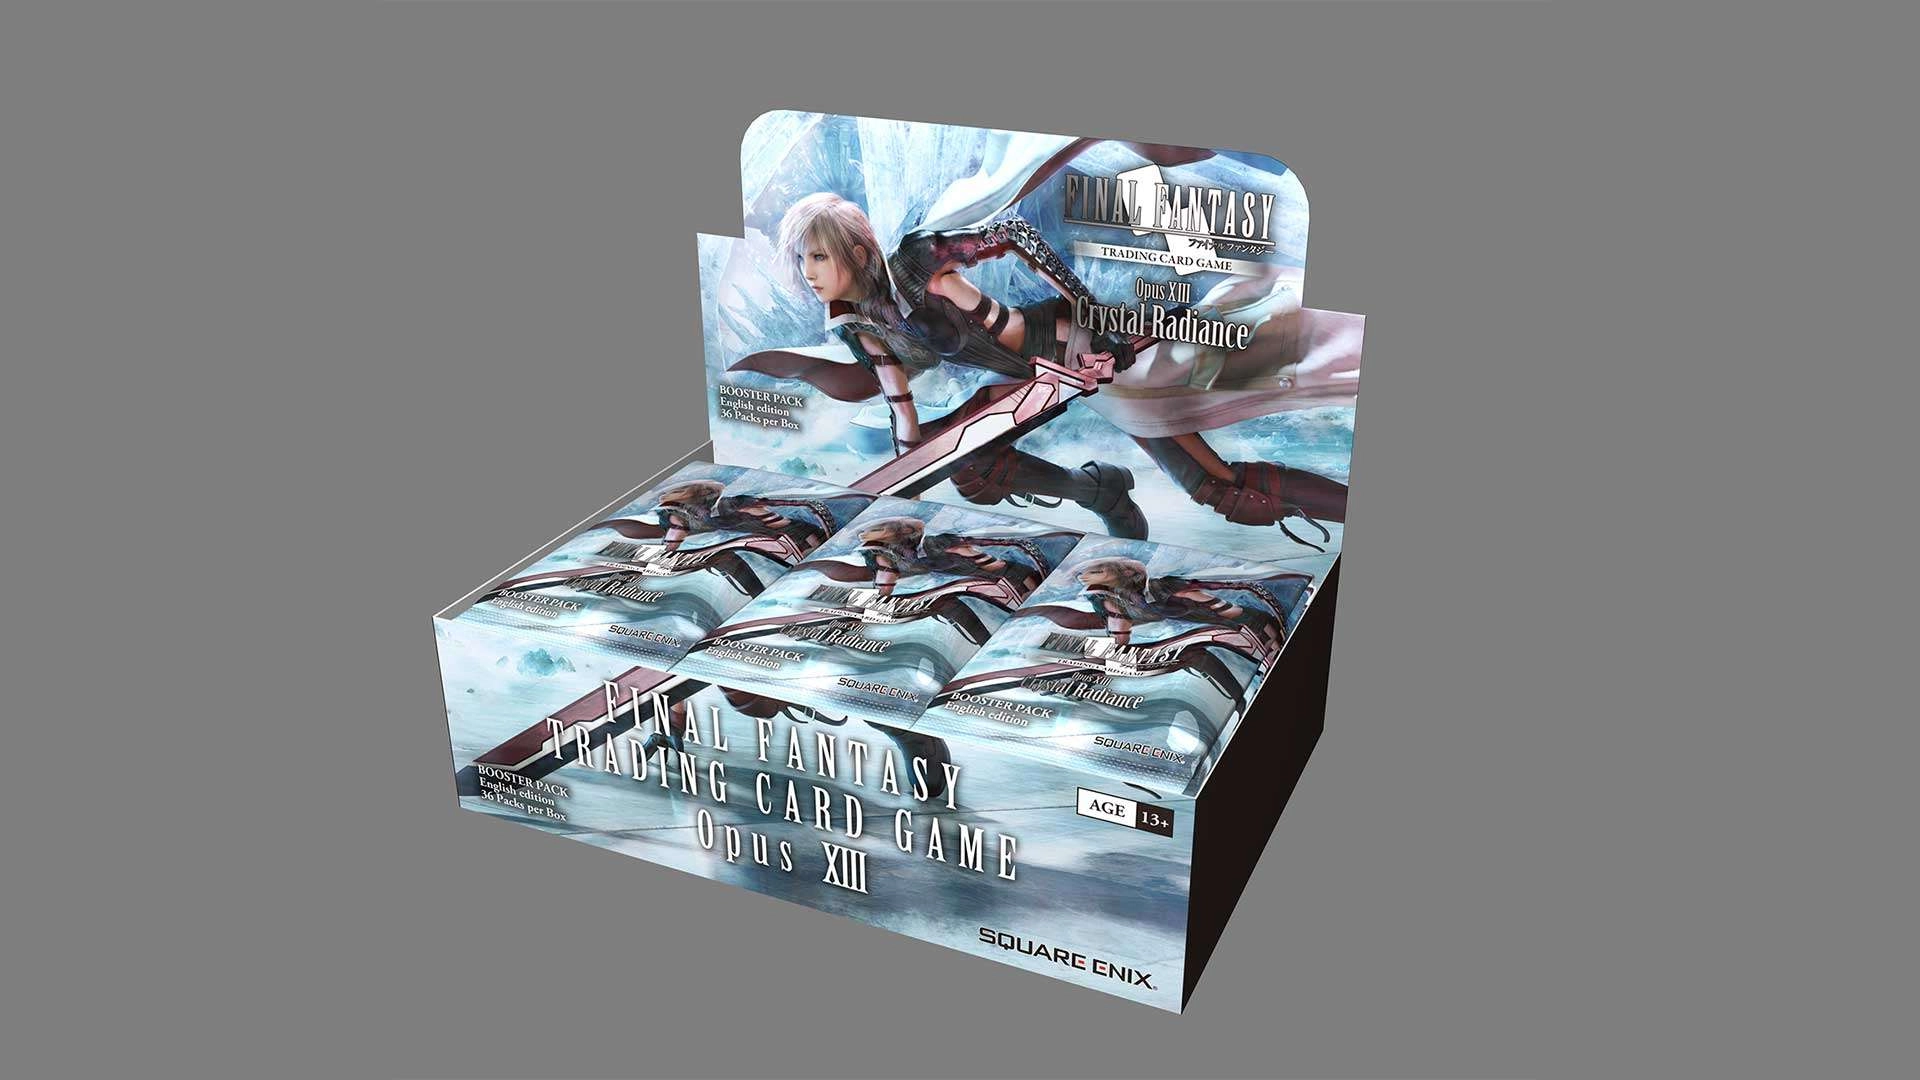 Final Fantasy TCG Opus XIII: Crystal Radiance booster pack